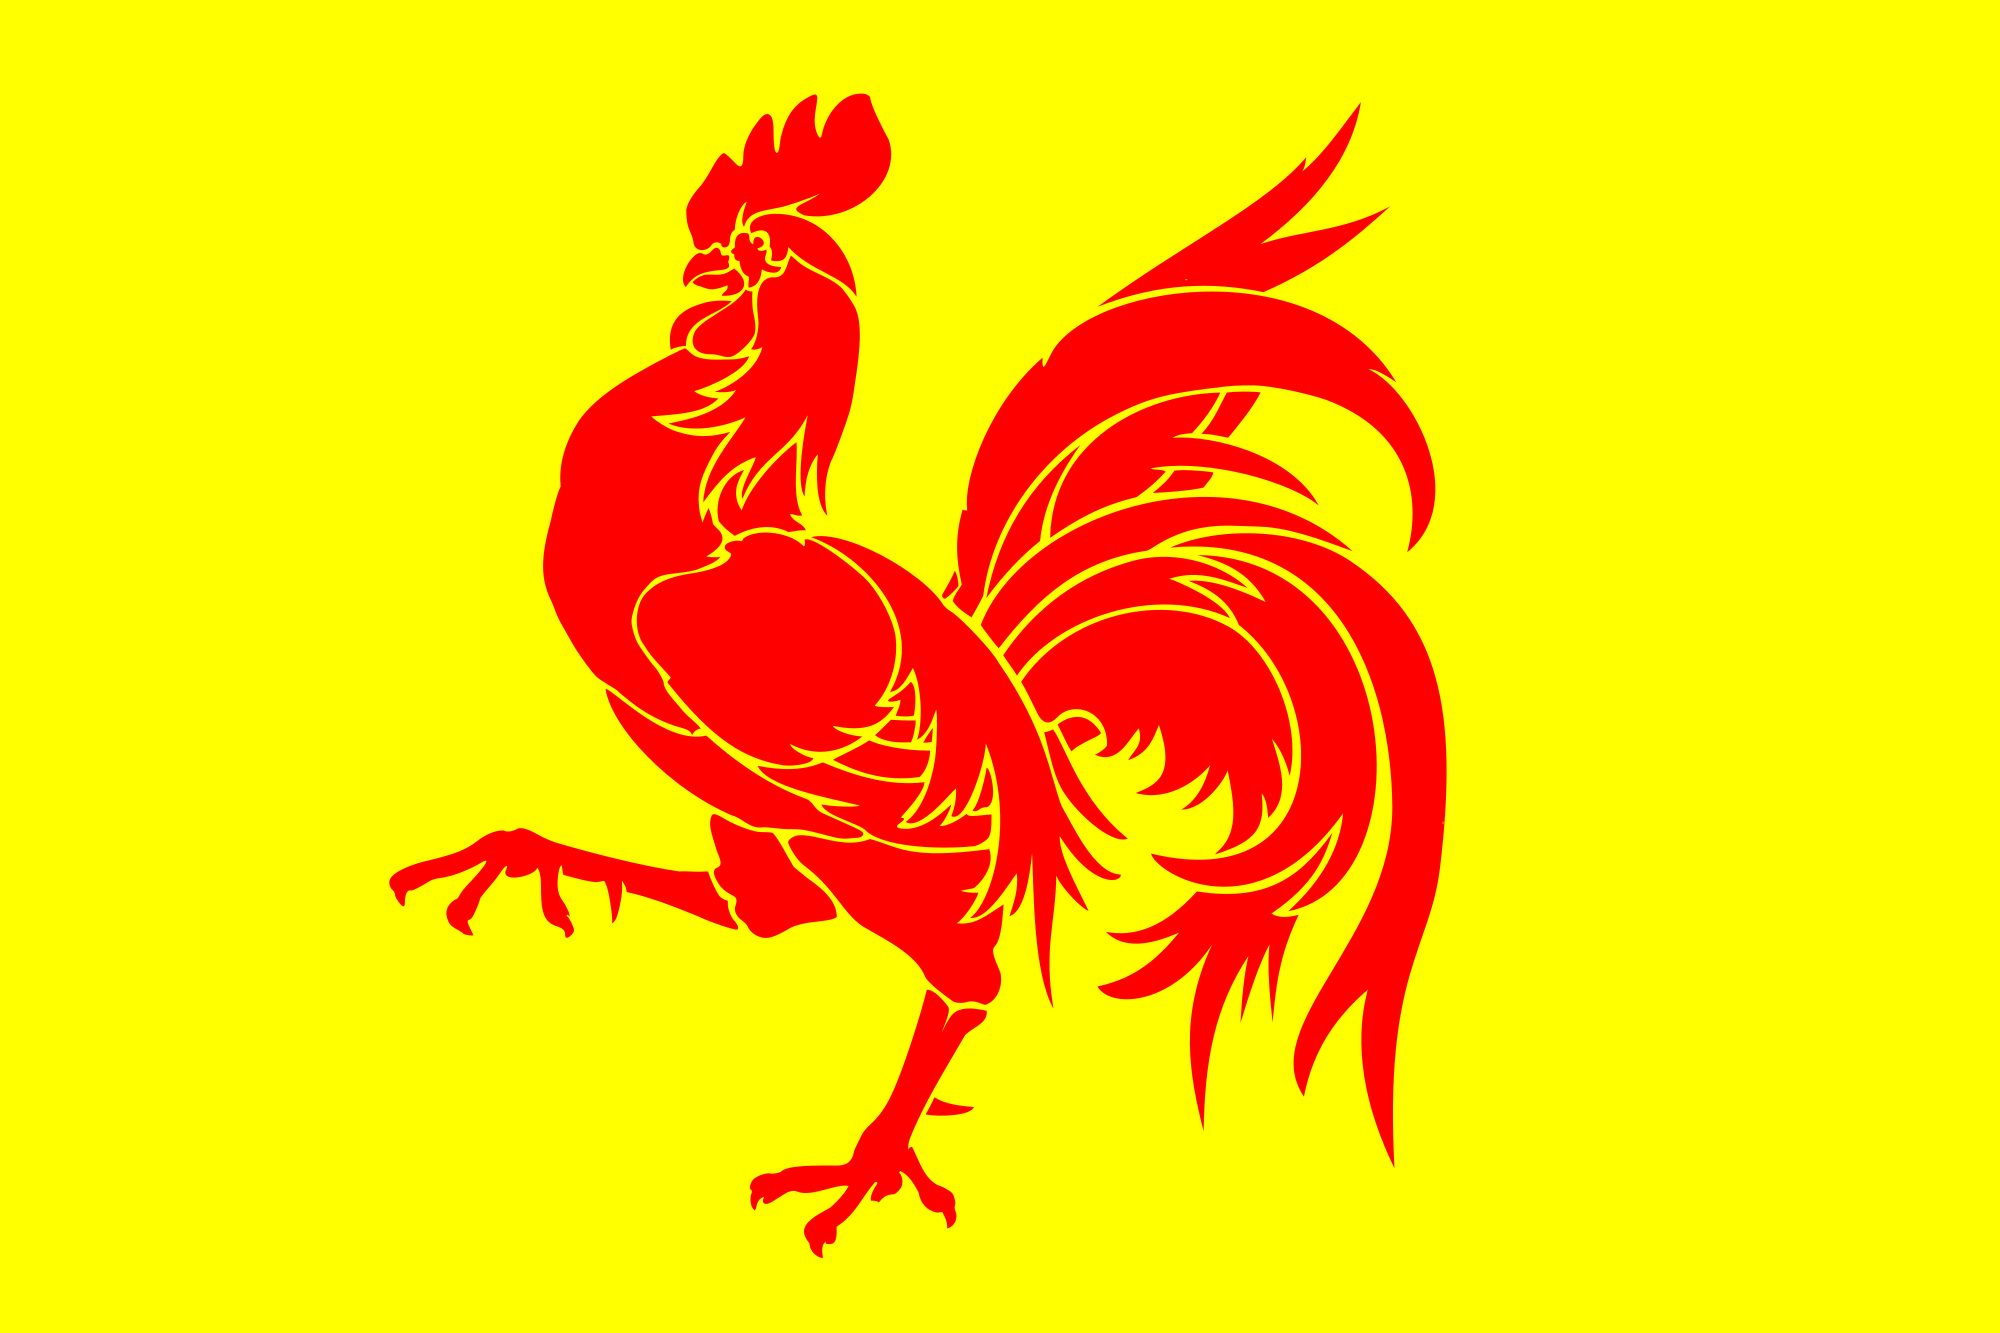 Most Famous Rooster Logo - Gallic rooster